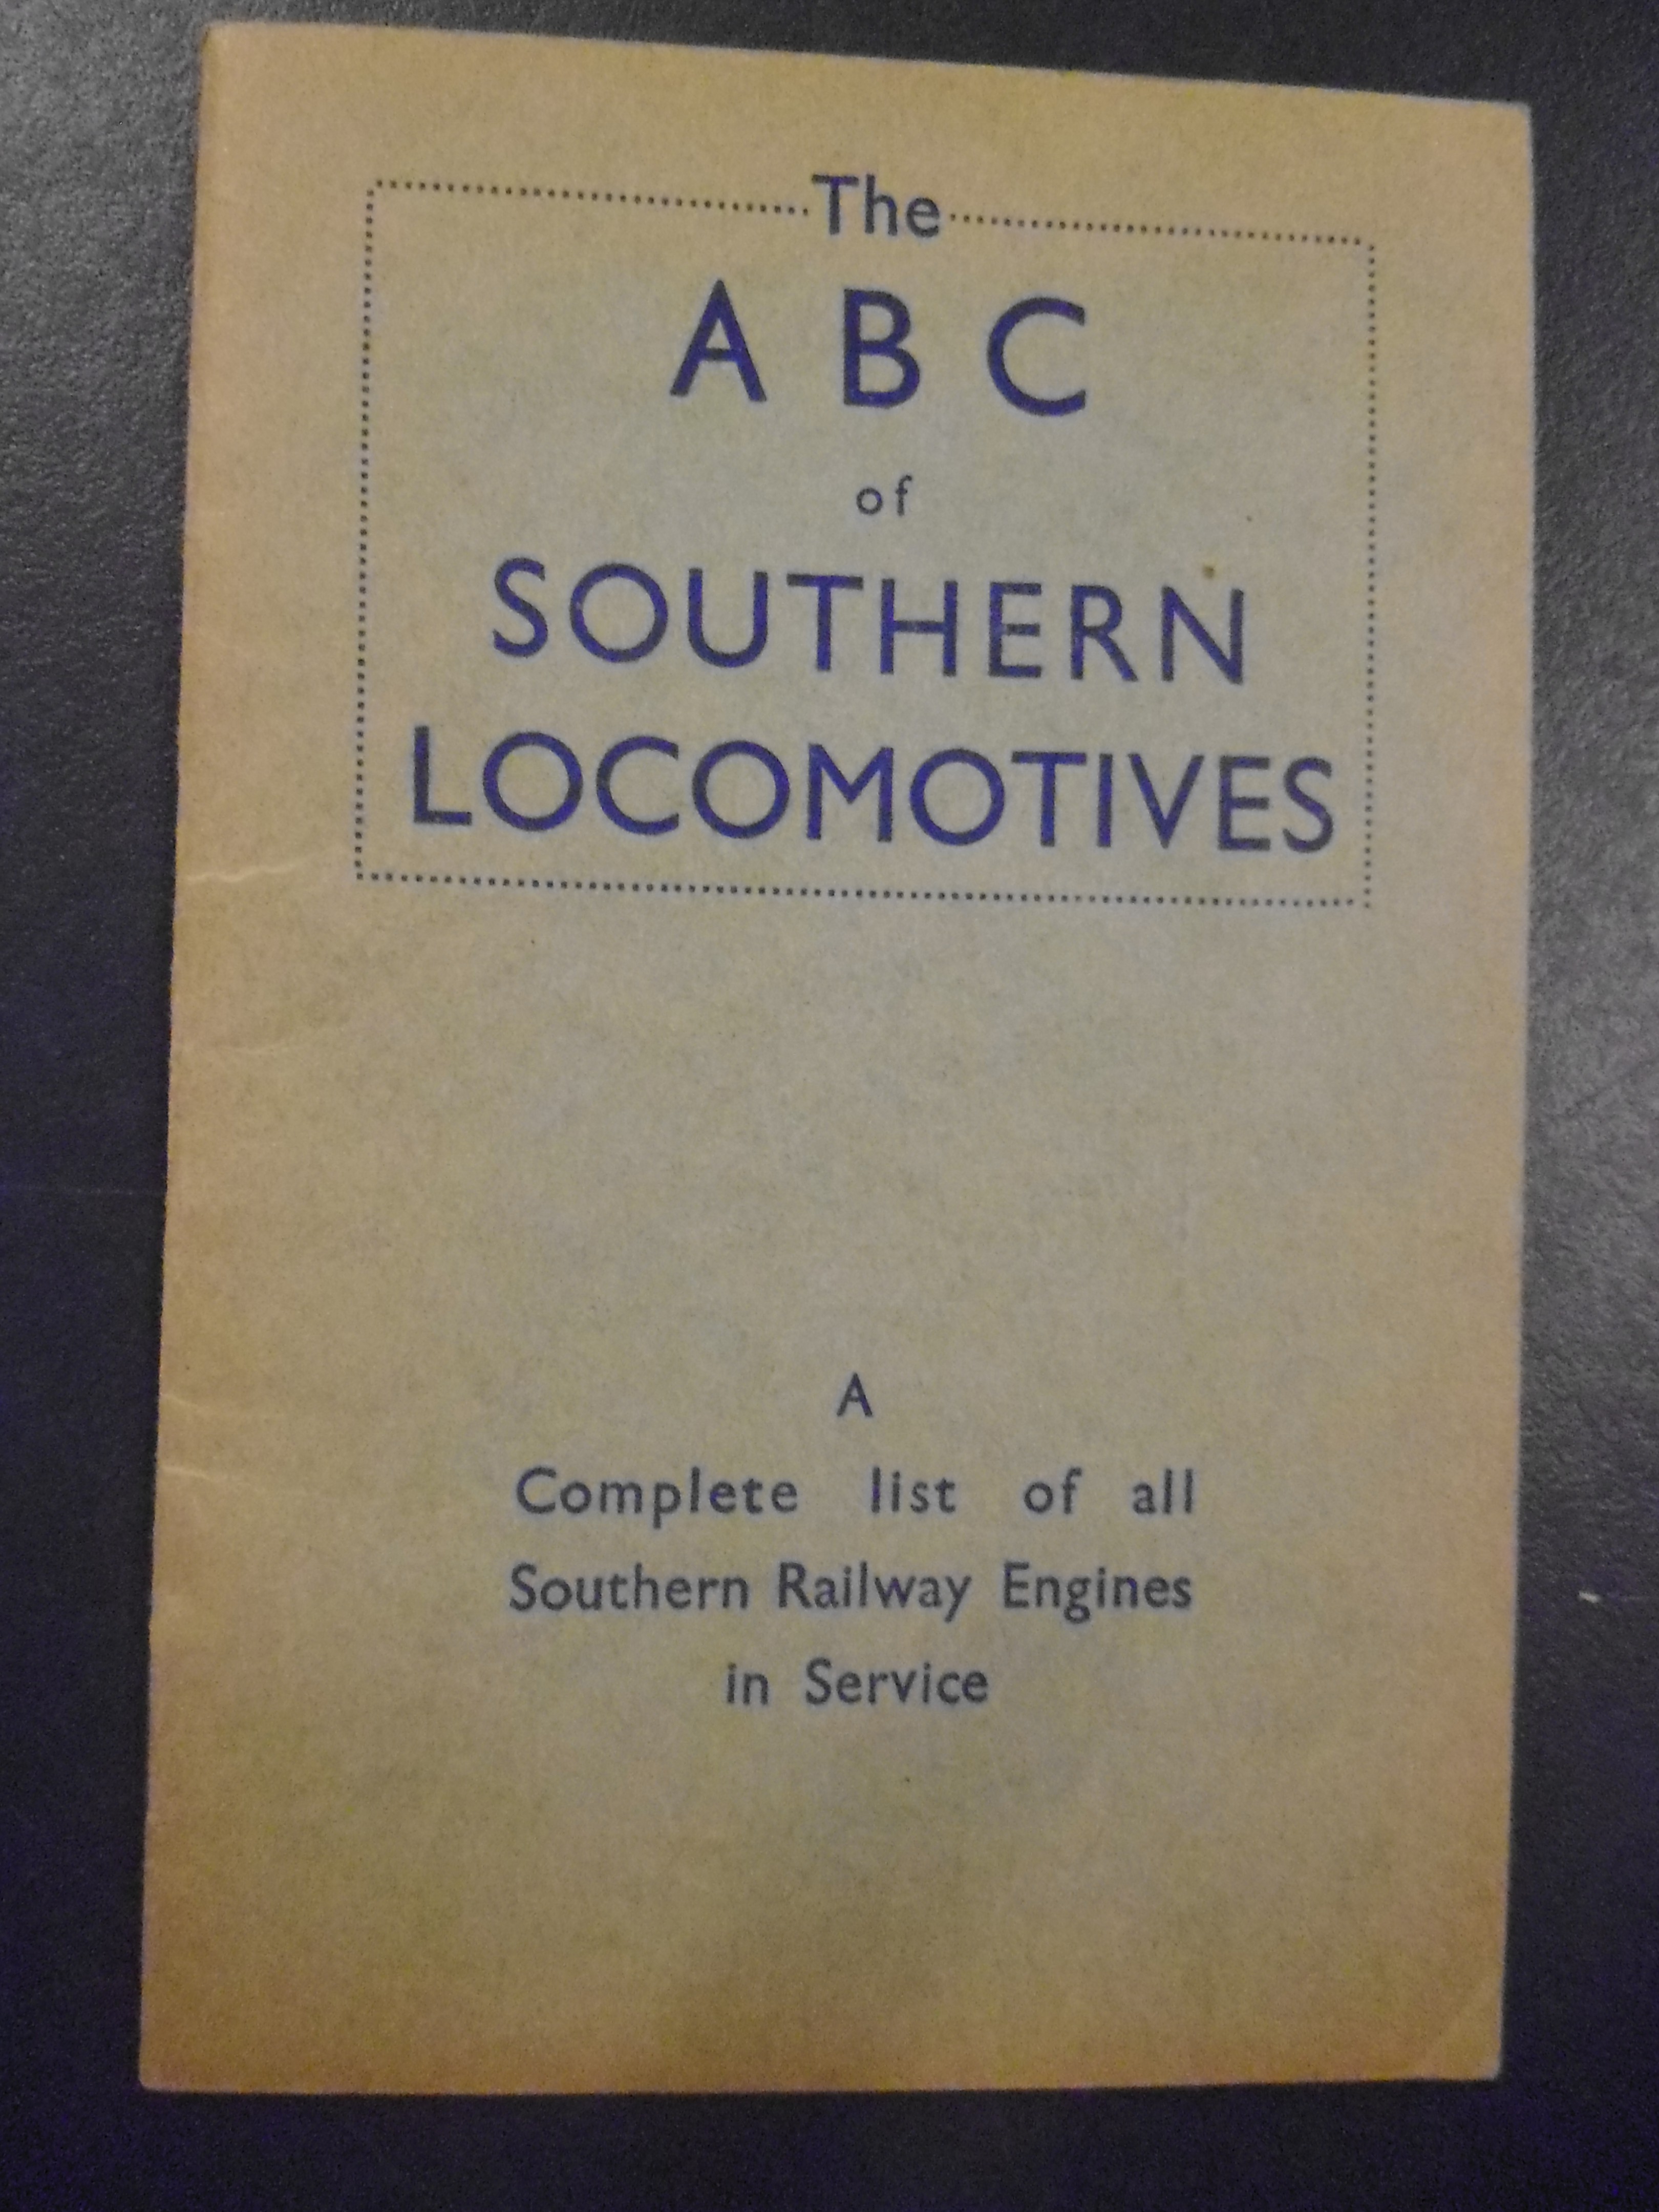 First ever Ian Allan ABC was of Southern Railway locomotives in 1942